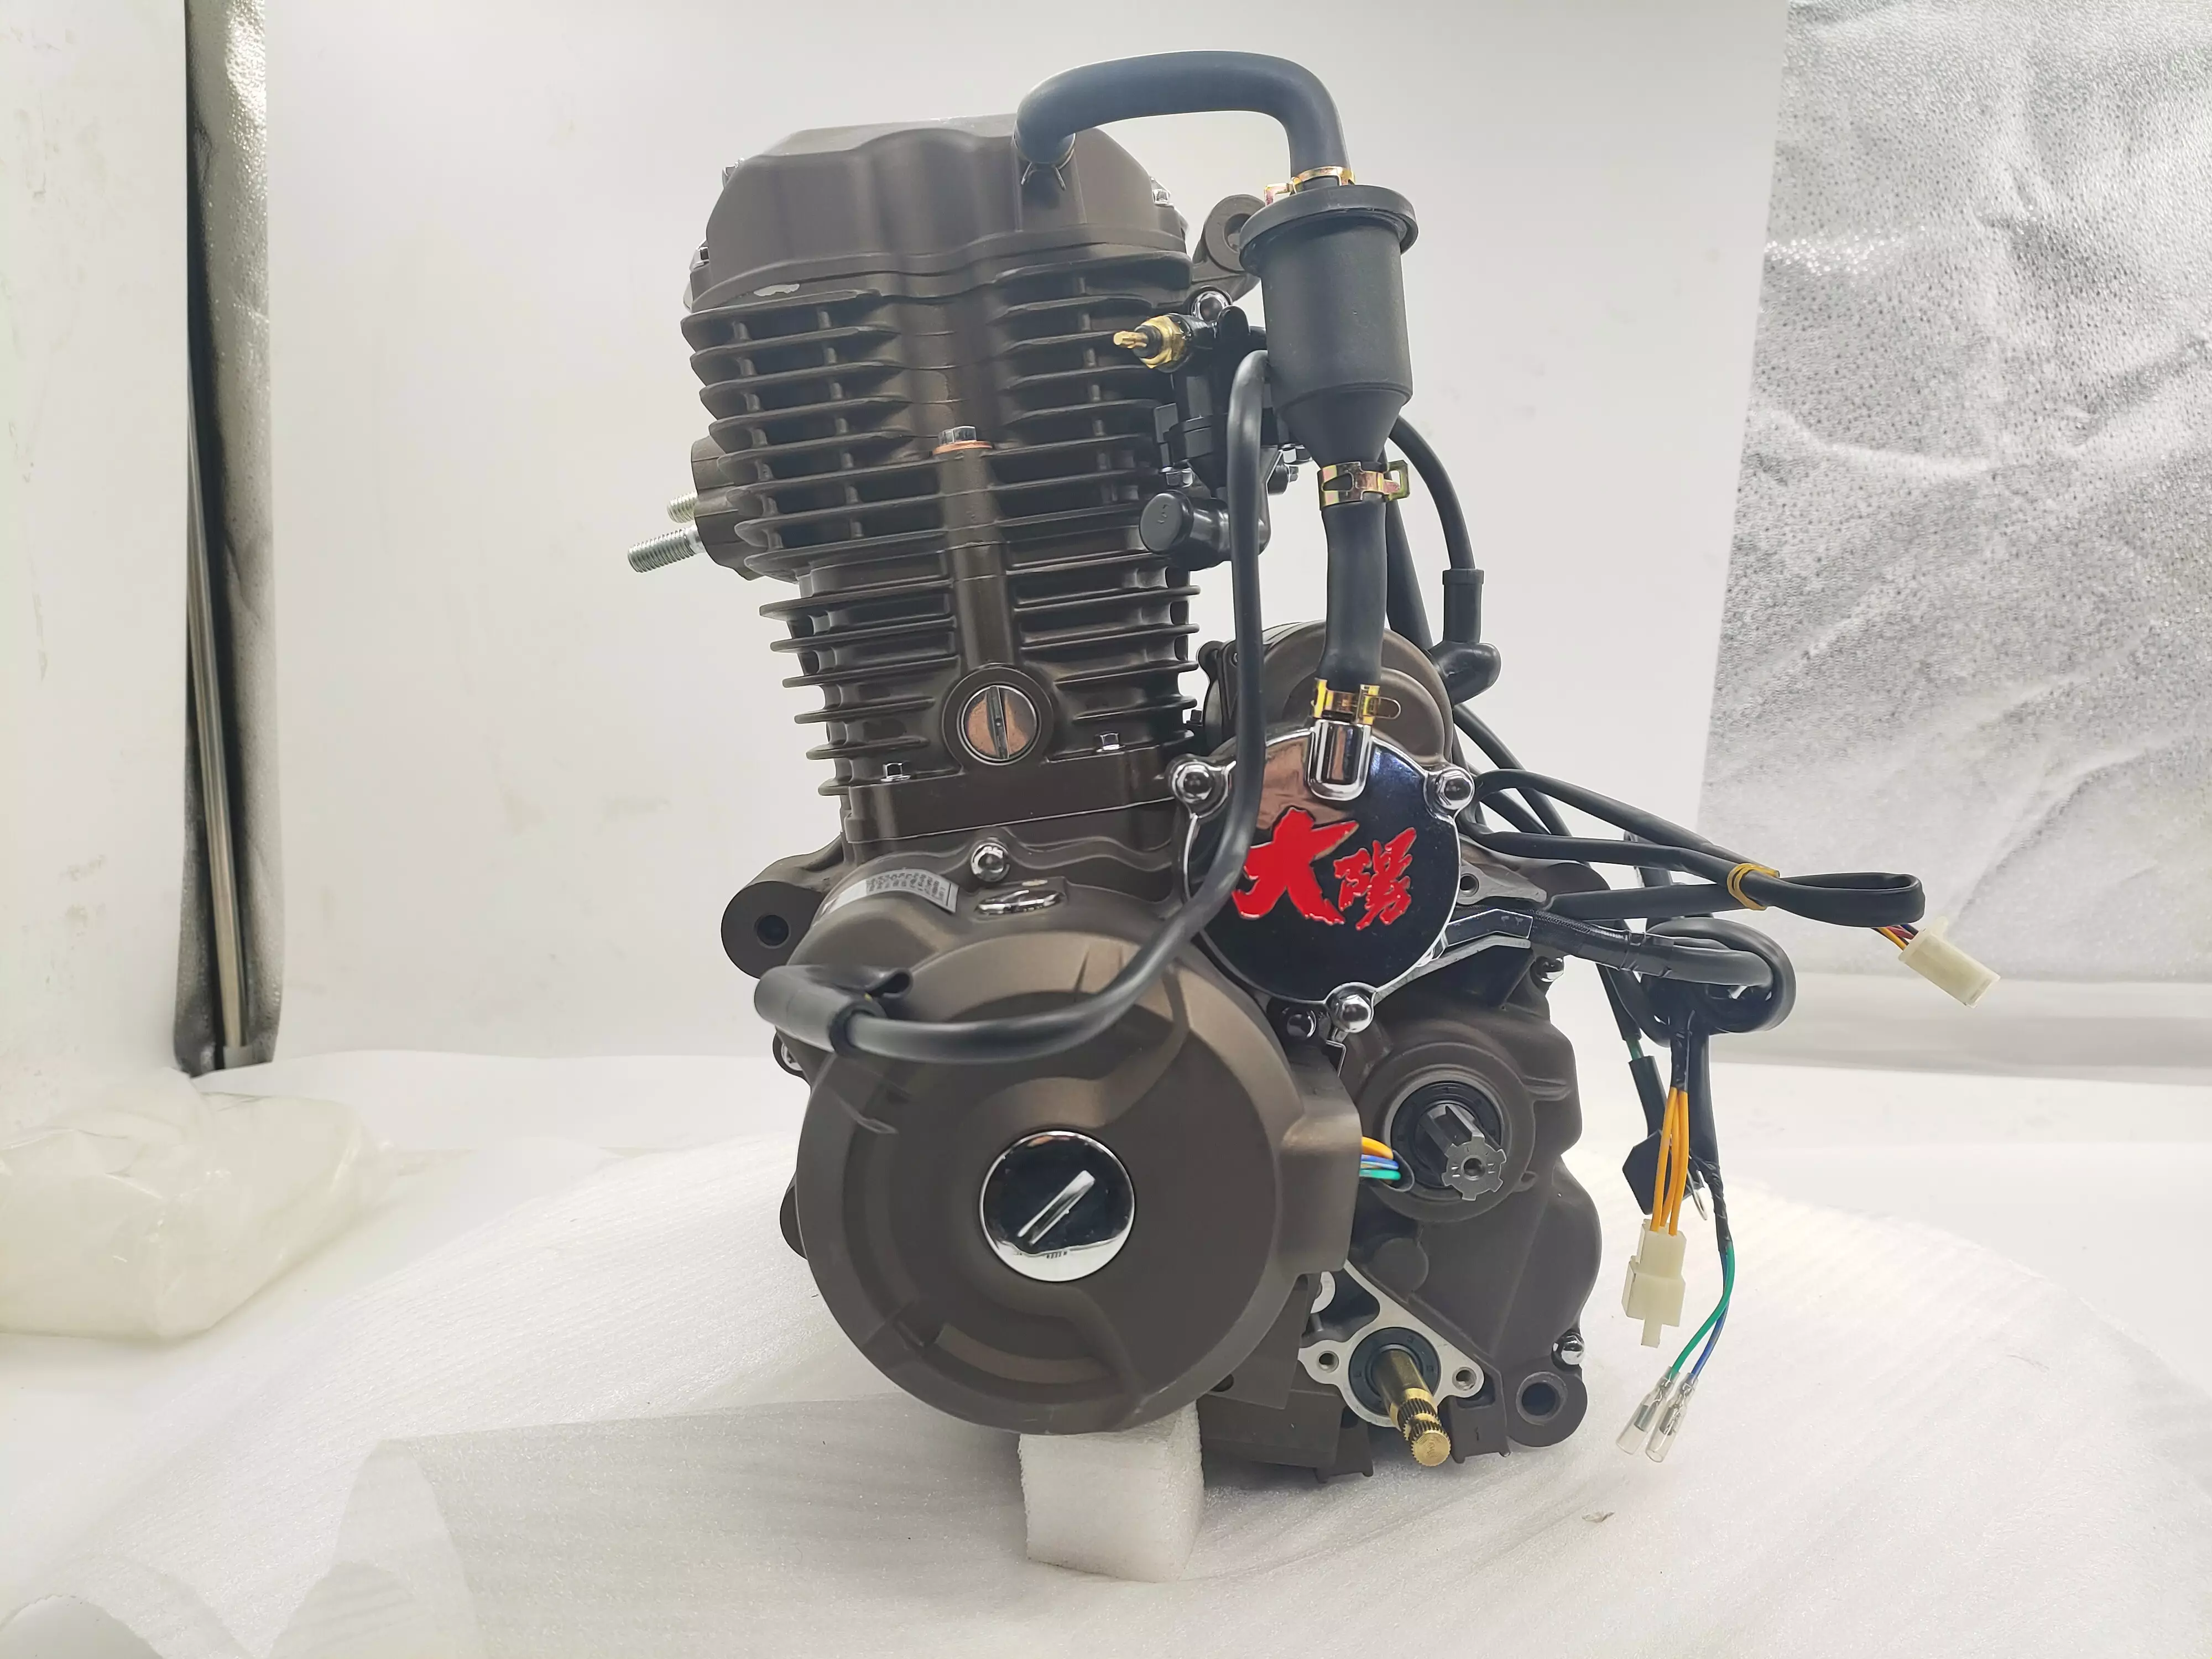 DAYANG CG300 New Super Cool Complete Motorcycle Cylinder China Chinese Motorcycle Engines Sea Electric /kick Start 300cc Engine